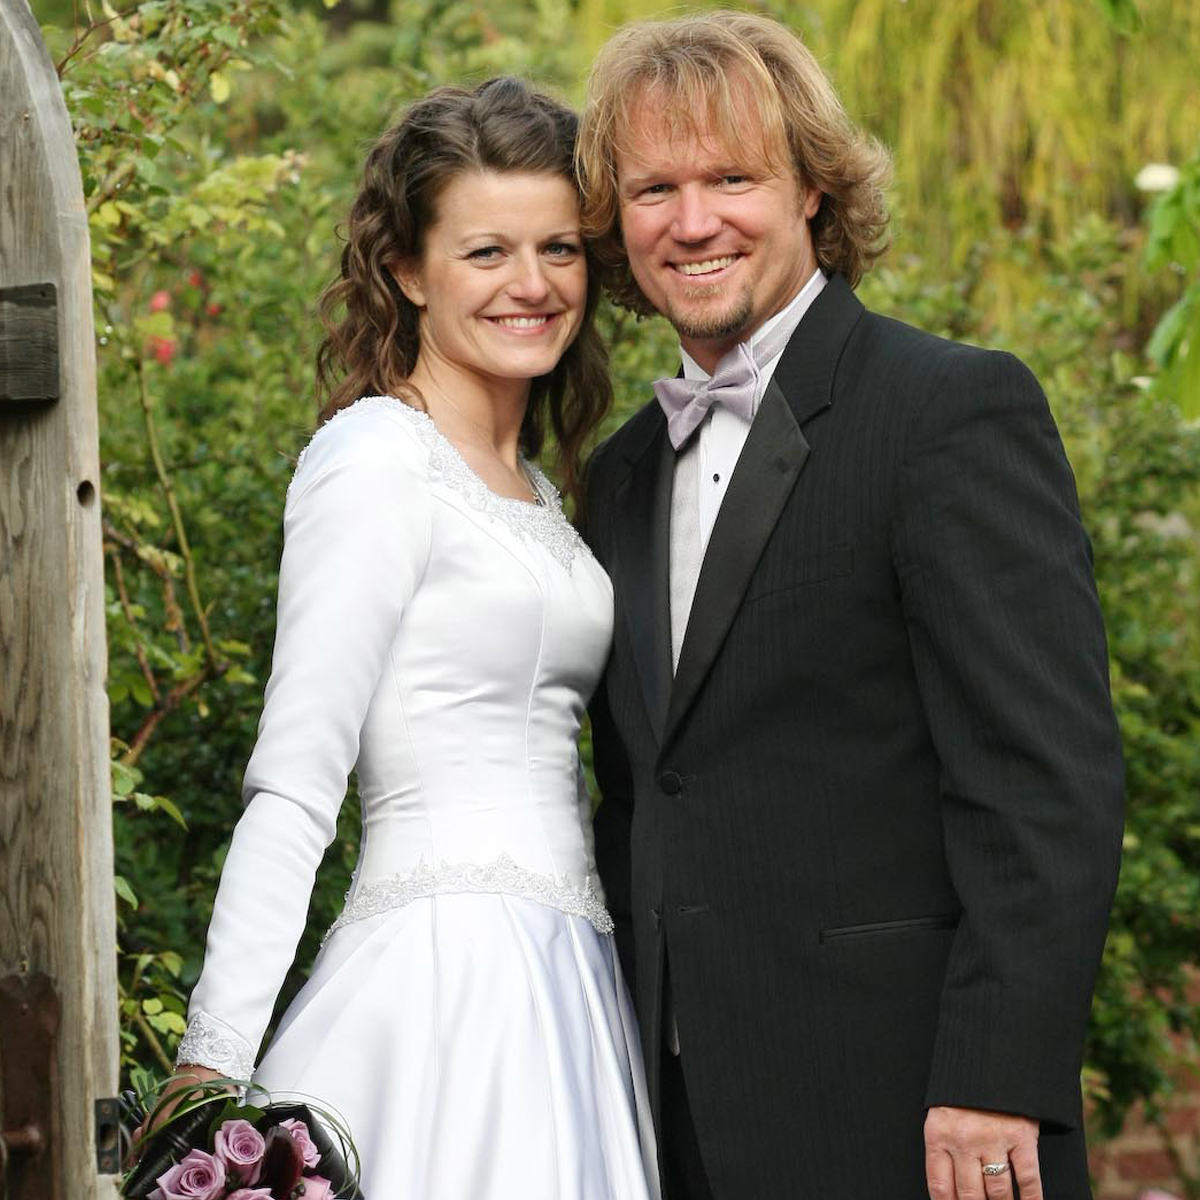 Sister Wives' star loses three spouses in a year, more splits of